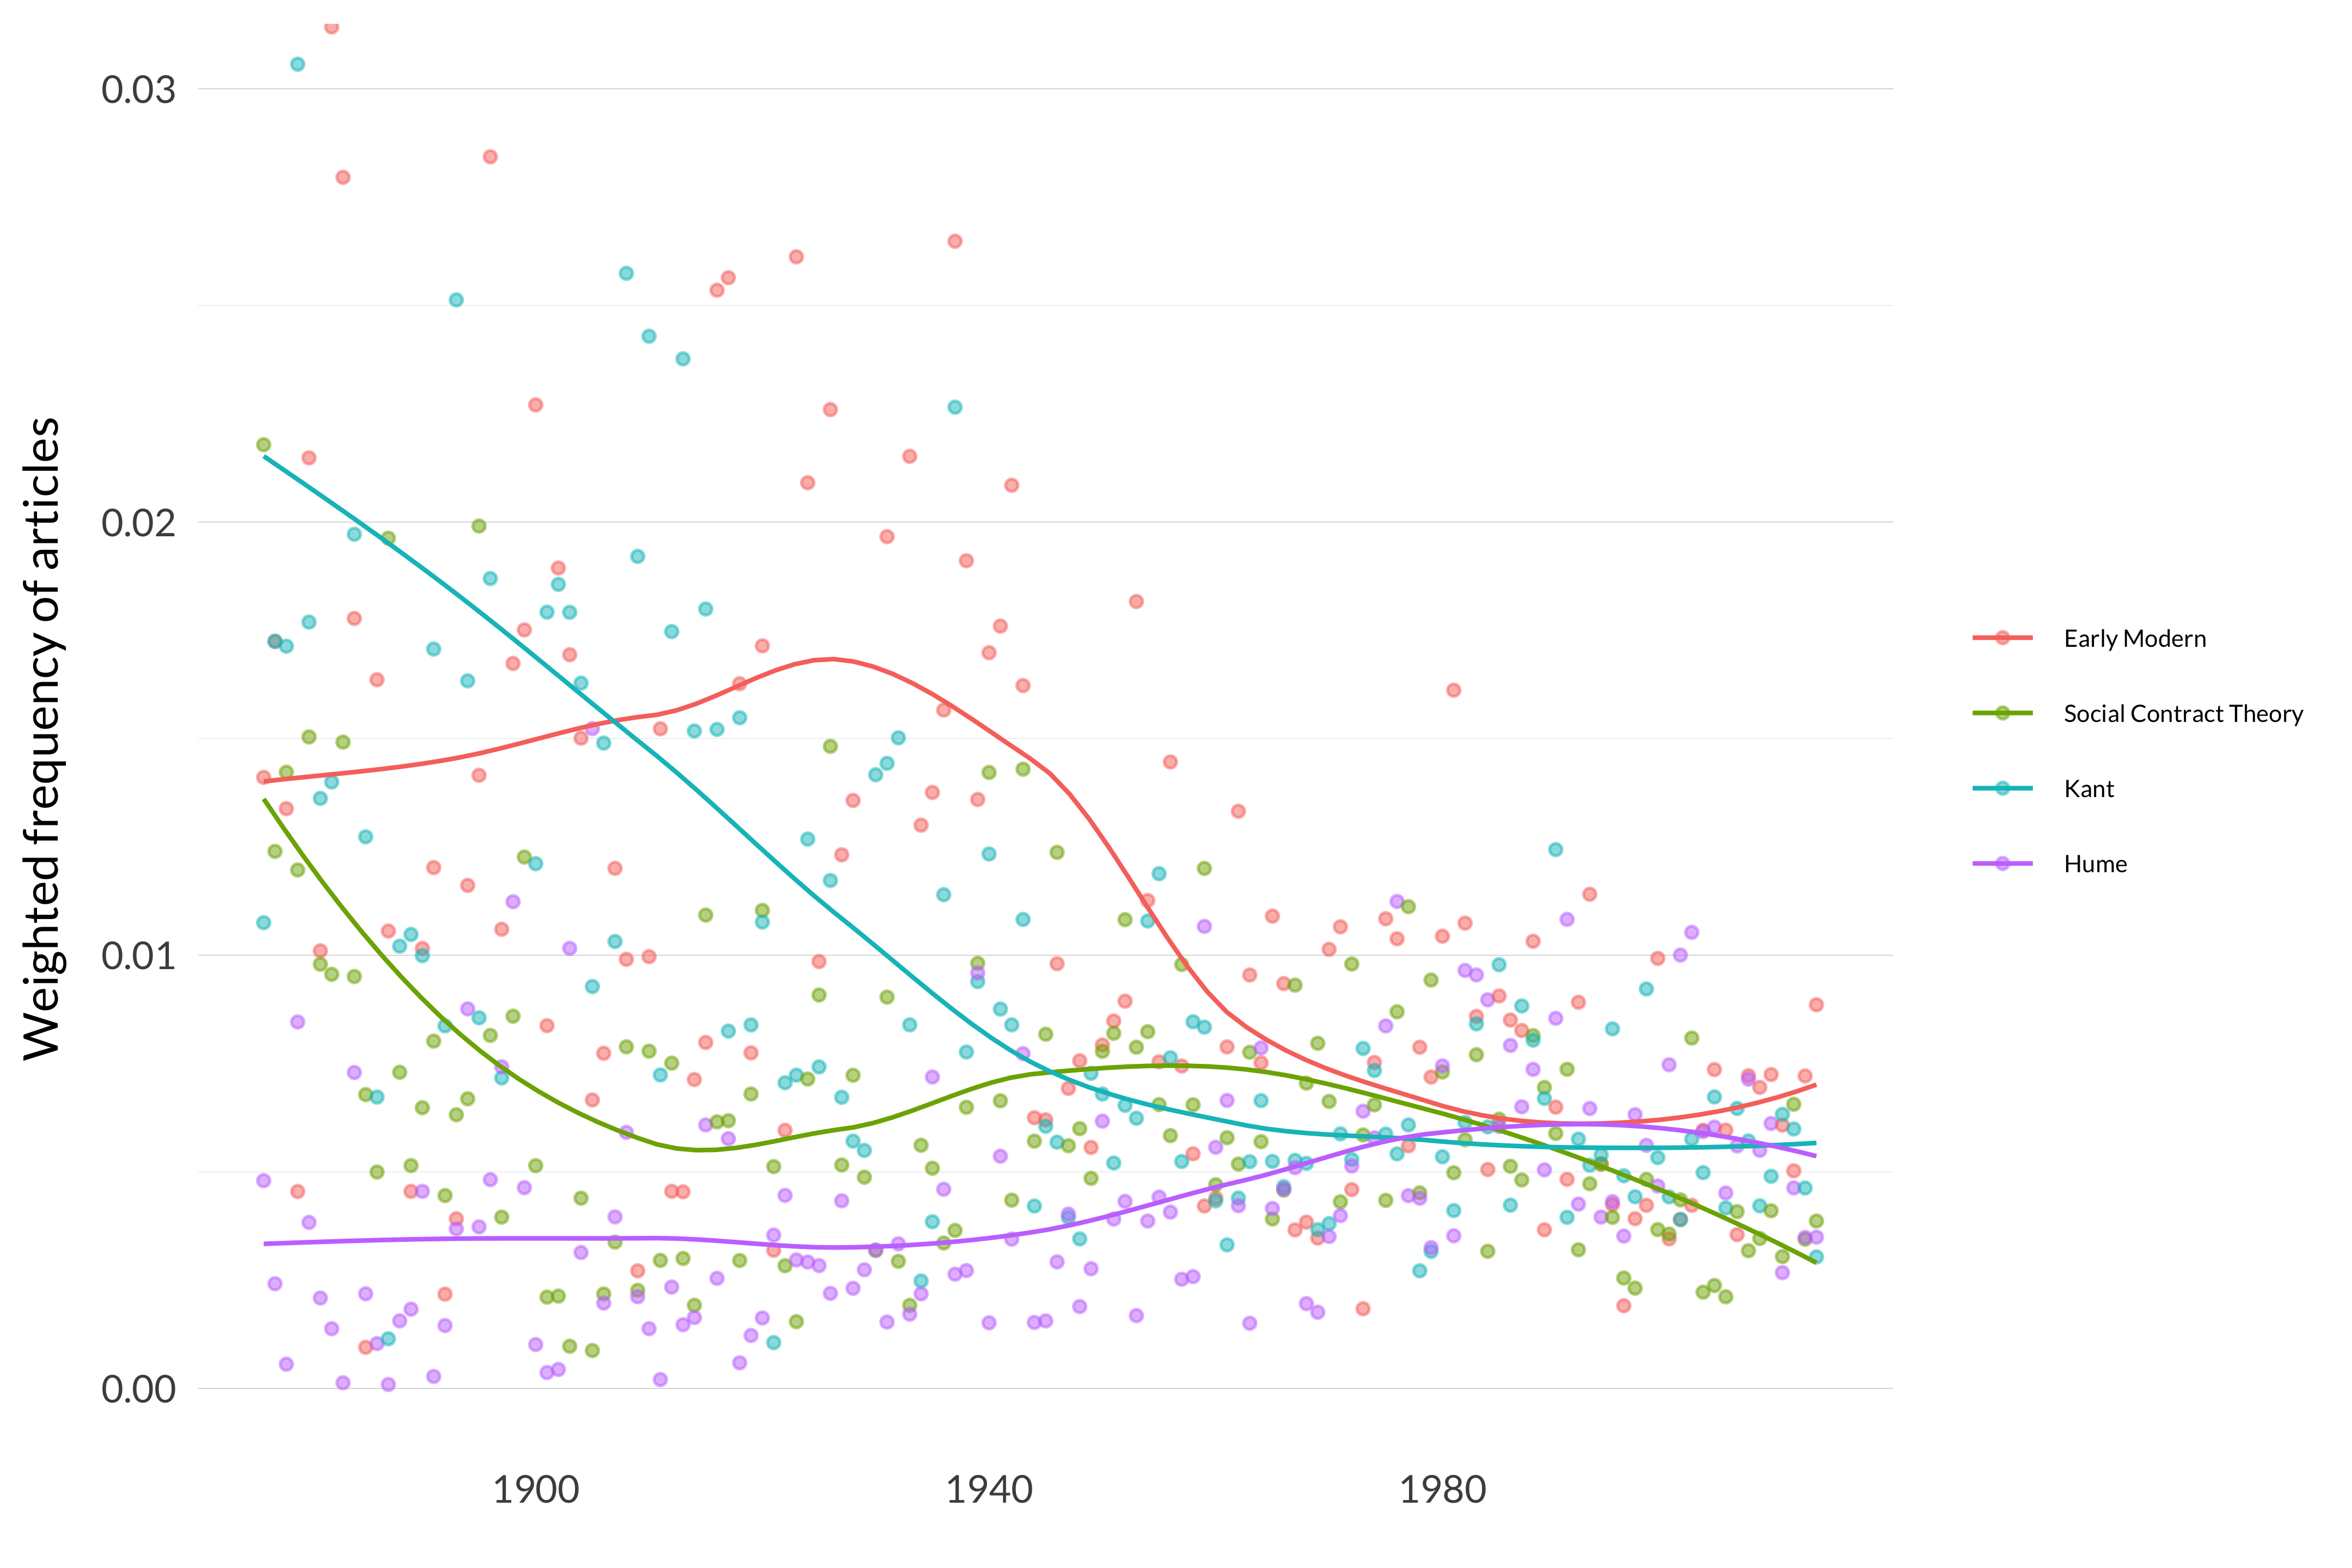 A scatterplot, with trendlines, of the topics early modern, social contract theory, Kant, and Hume. In the early years, Hume is the smallest by a long way. But the other three fall a lot, and Hume gently rises, so that in recent years social contract is by far the smallest, and the other three are similar in size.